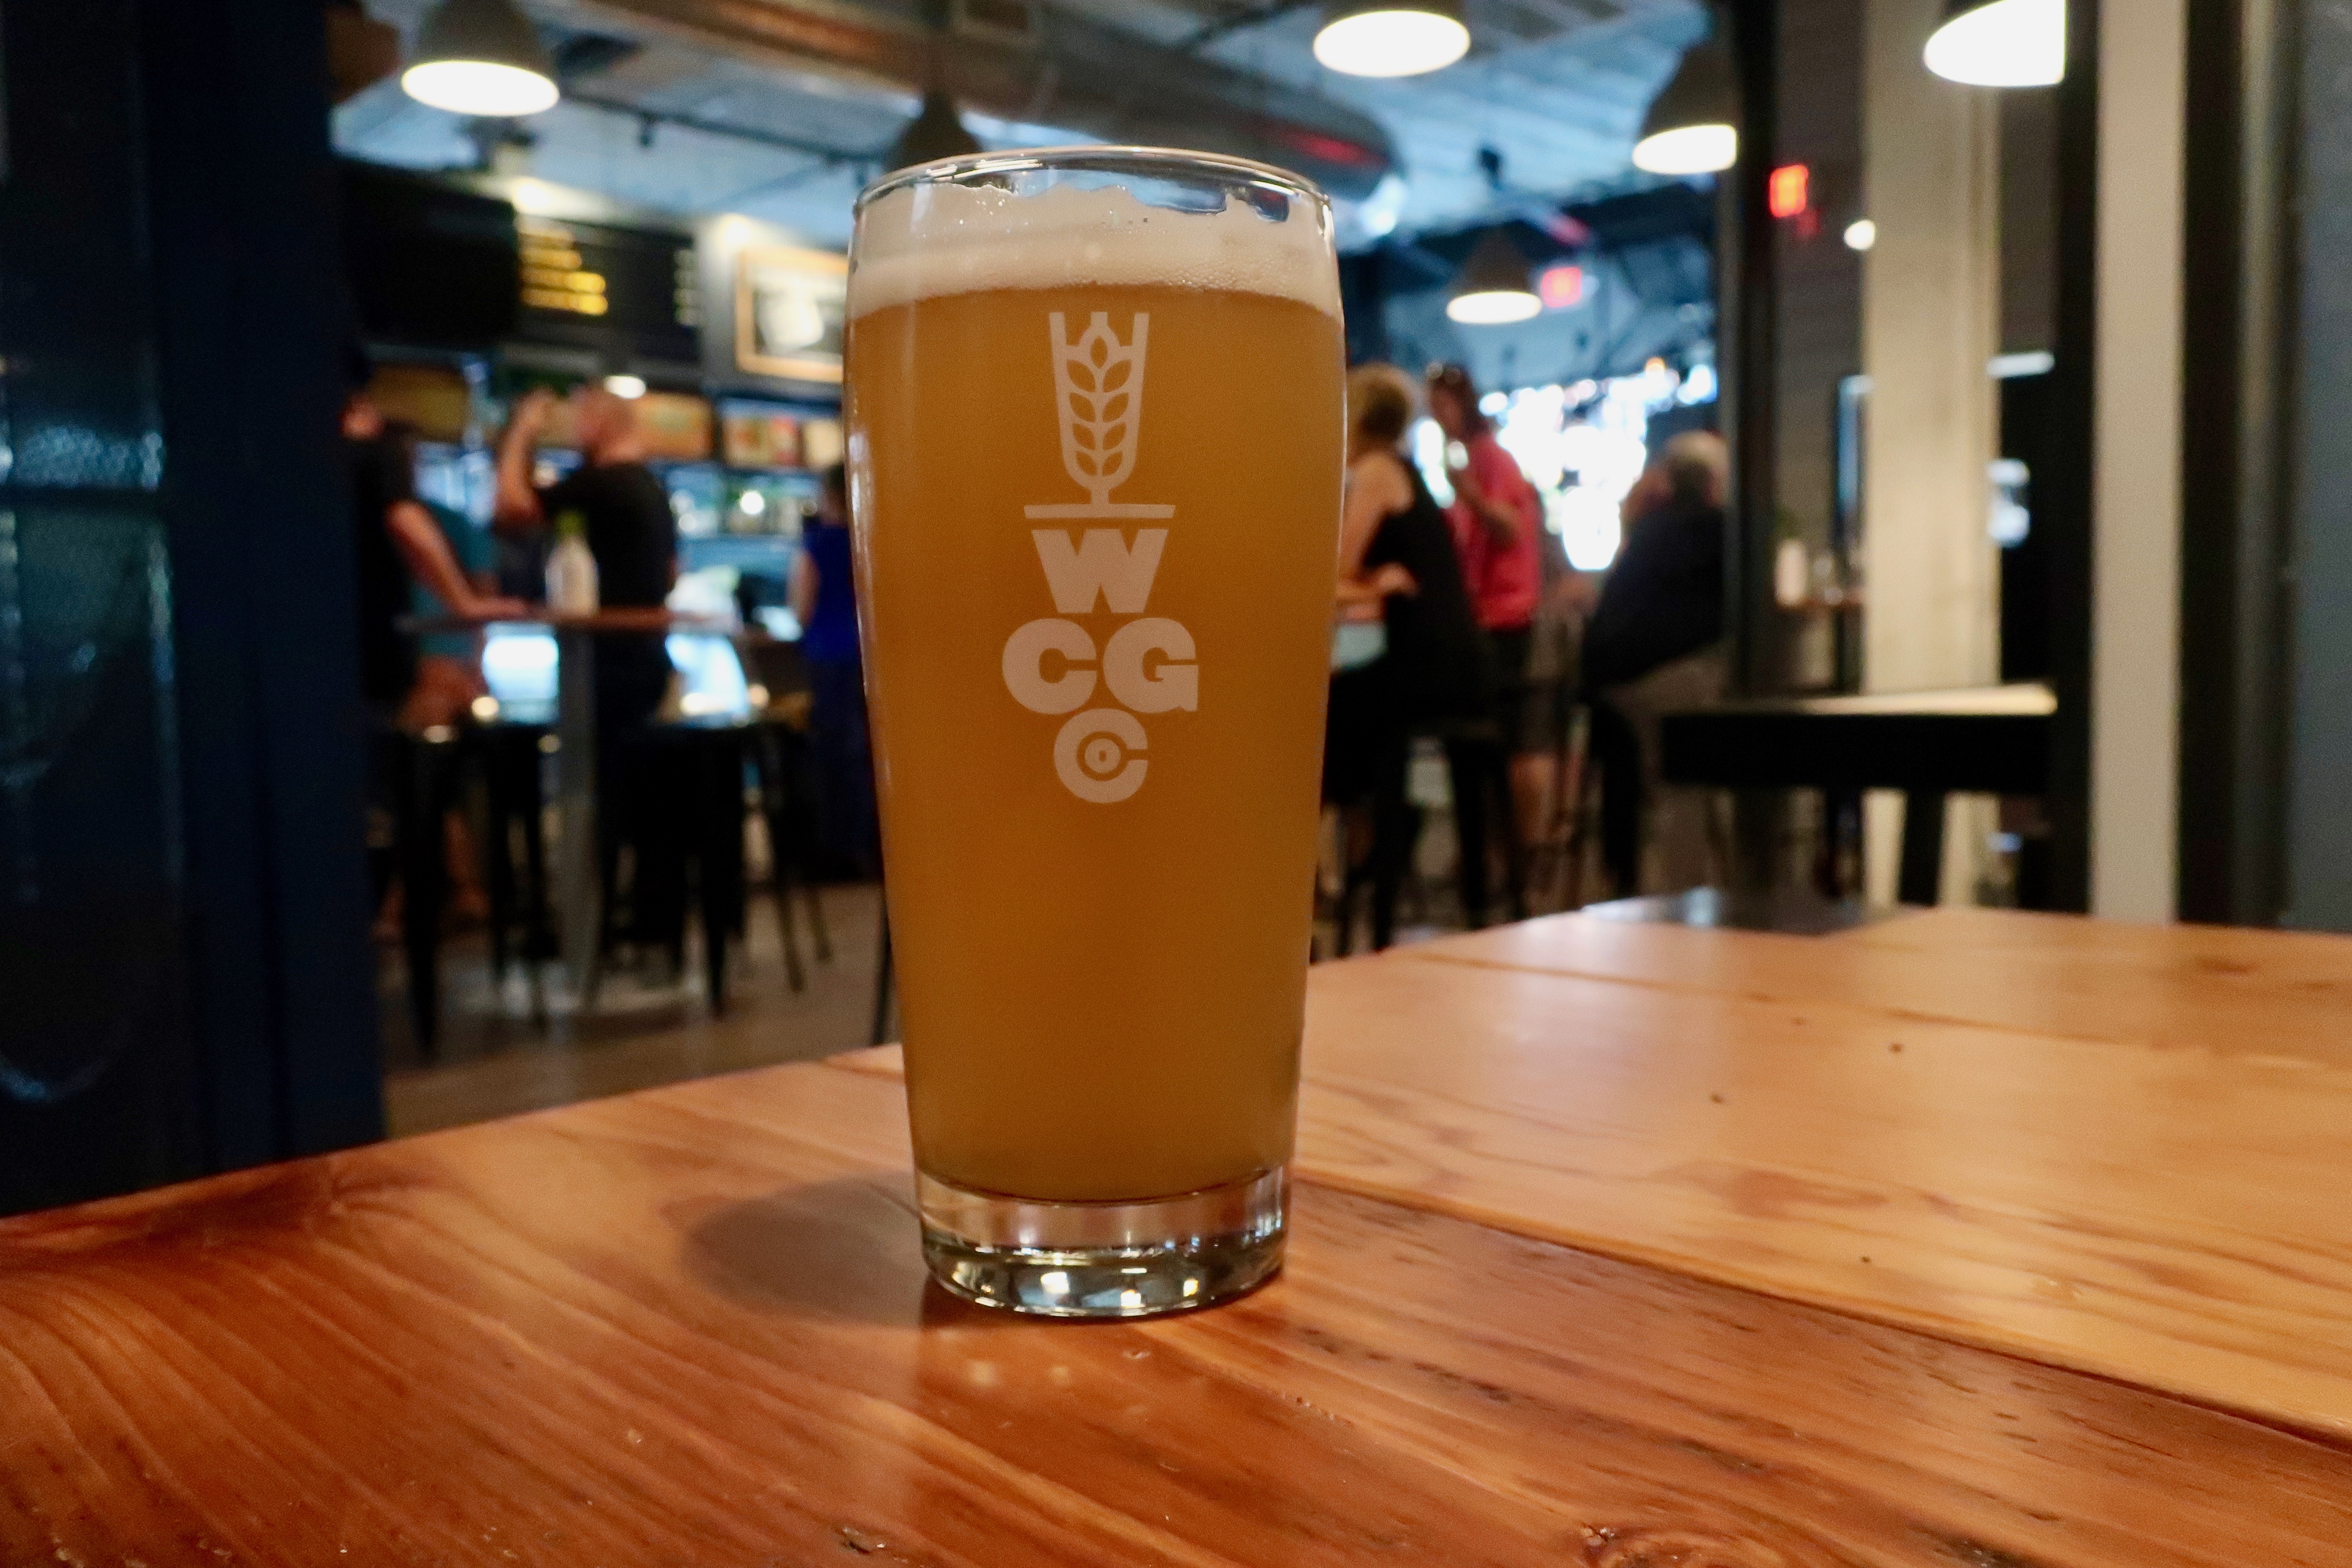 A pint of Grisette at West Coast Grocery Co., a collaboration beer with Level Beer.